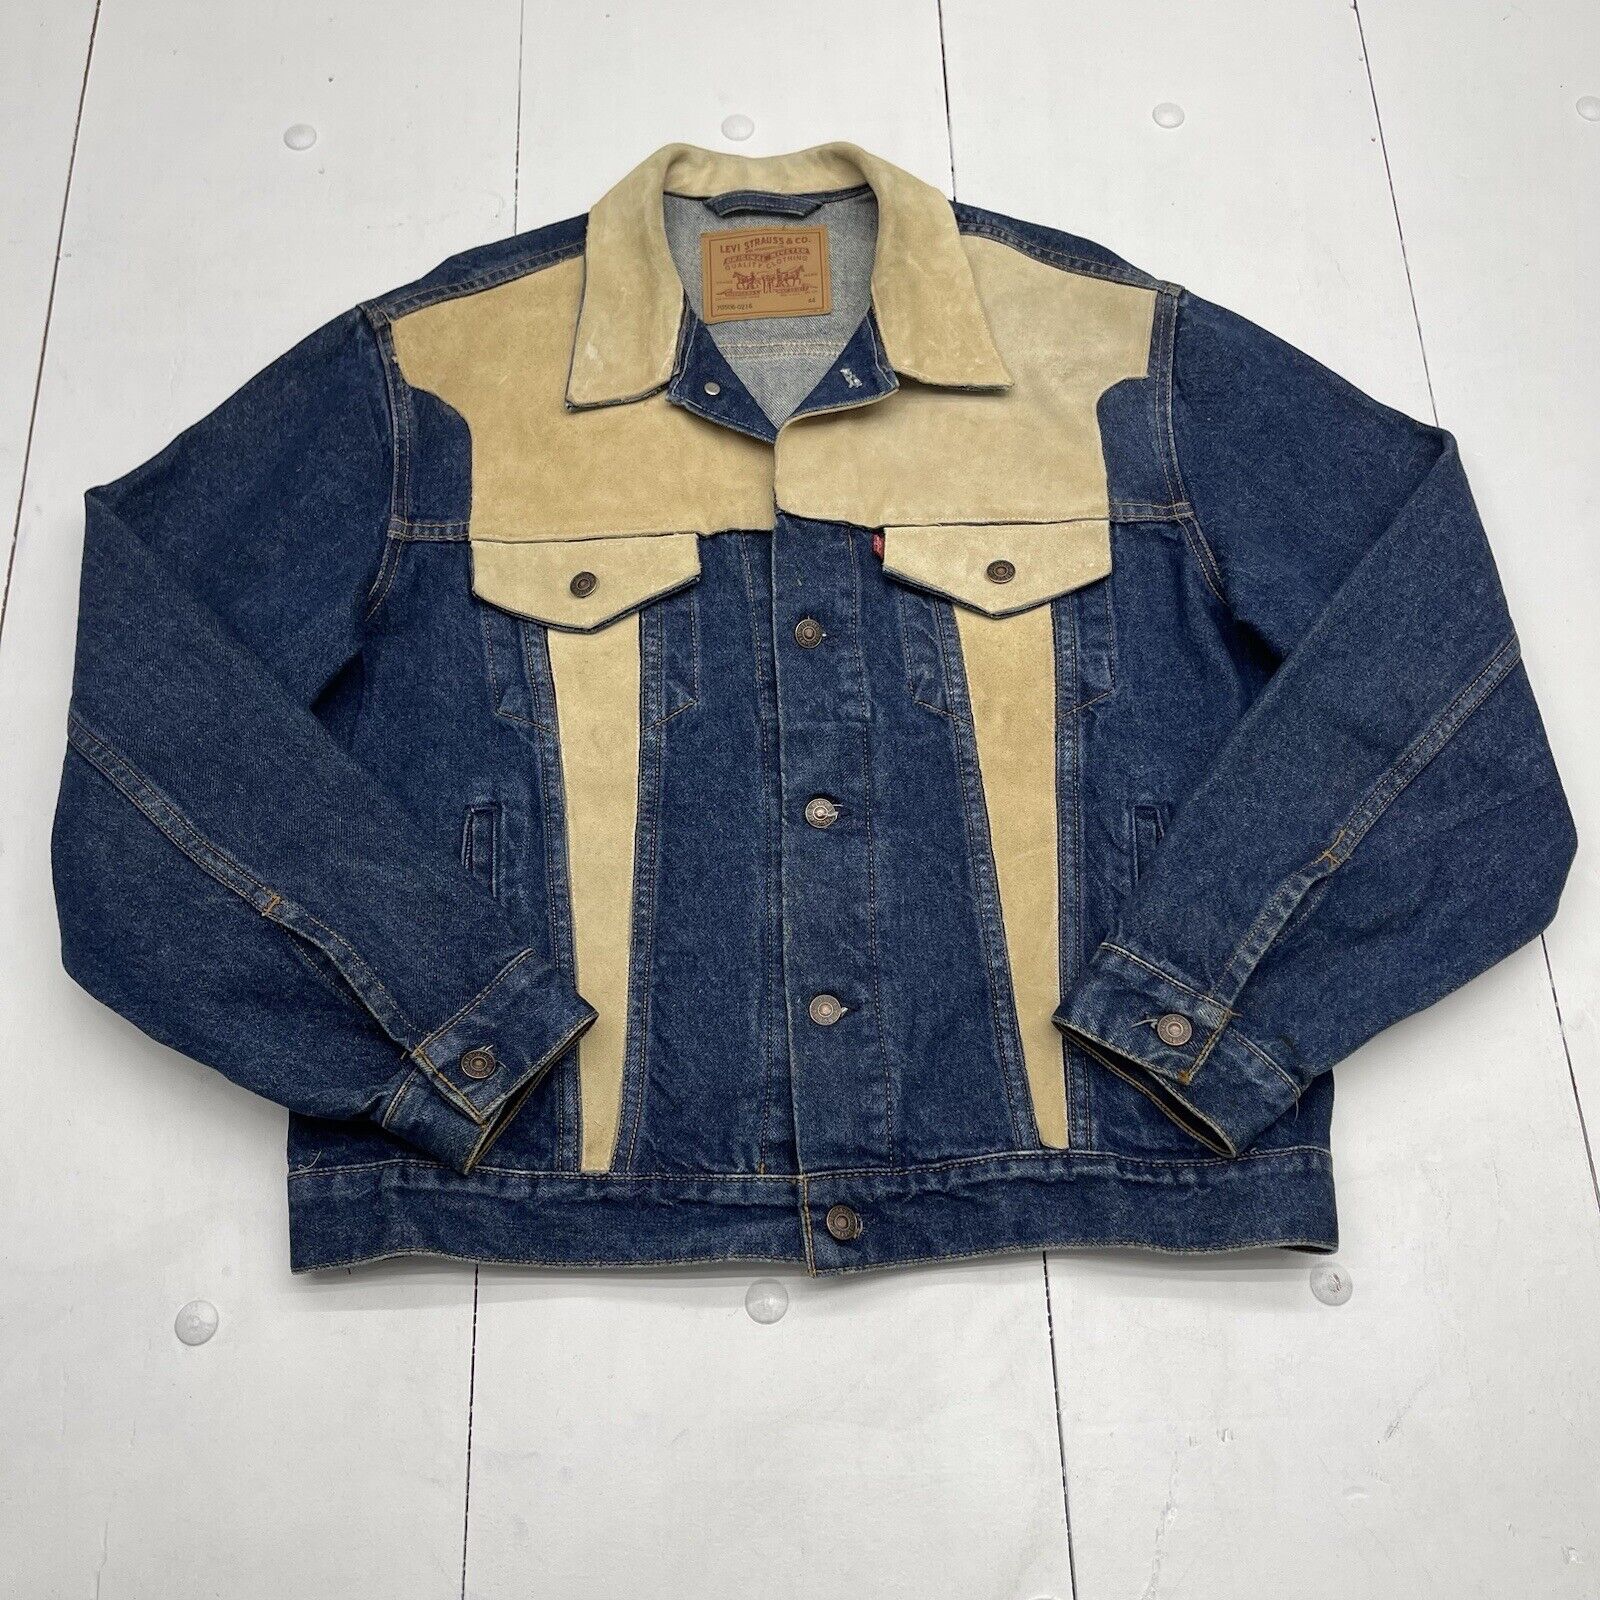 Levi's® Vintage Denim Jackets Detailed in New Book - Levi Strauss & Co :  Levi Strauss & Co